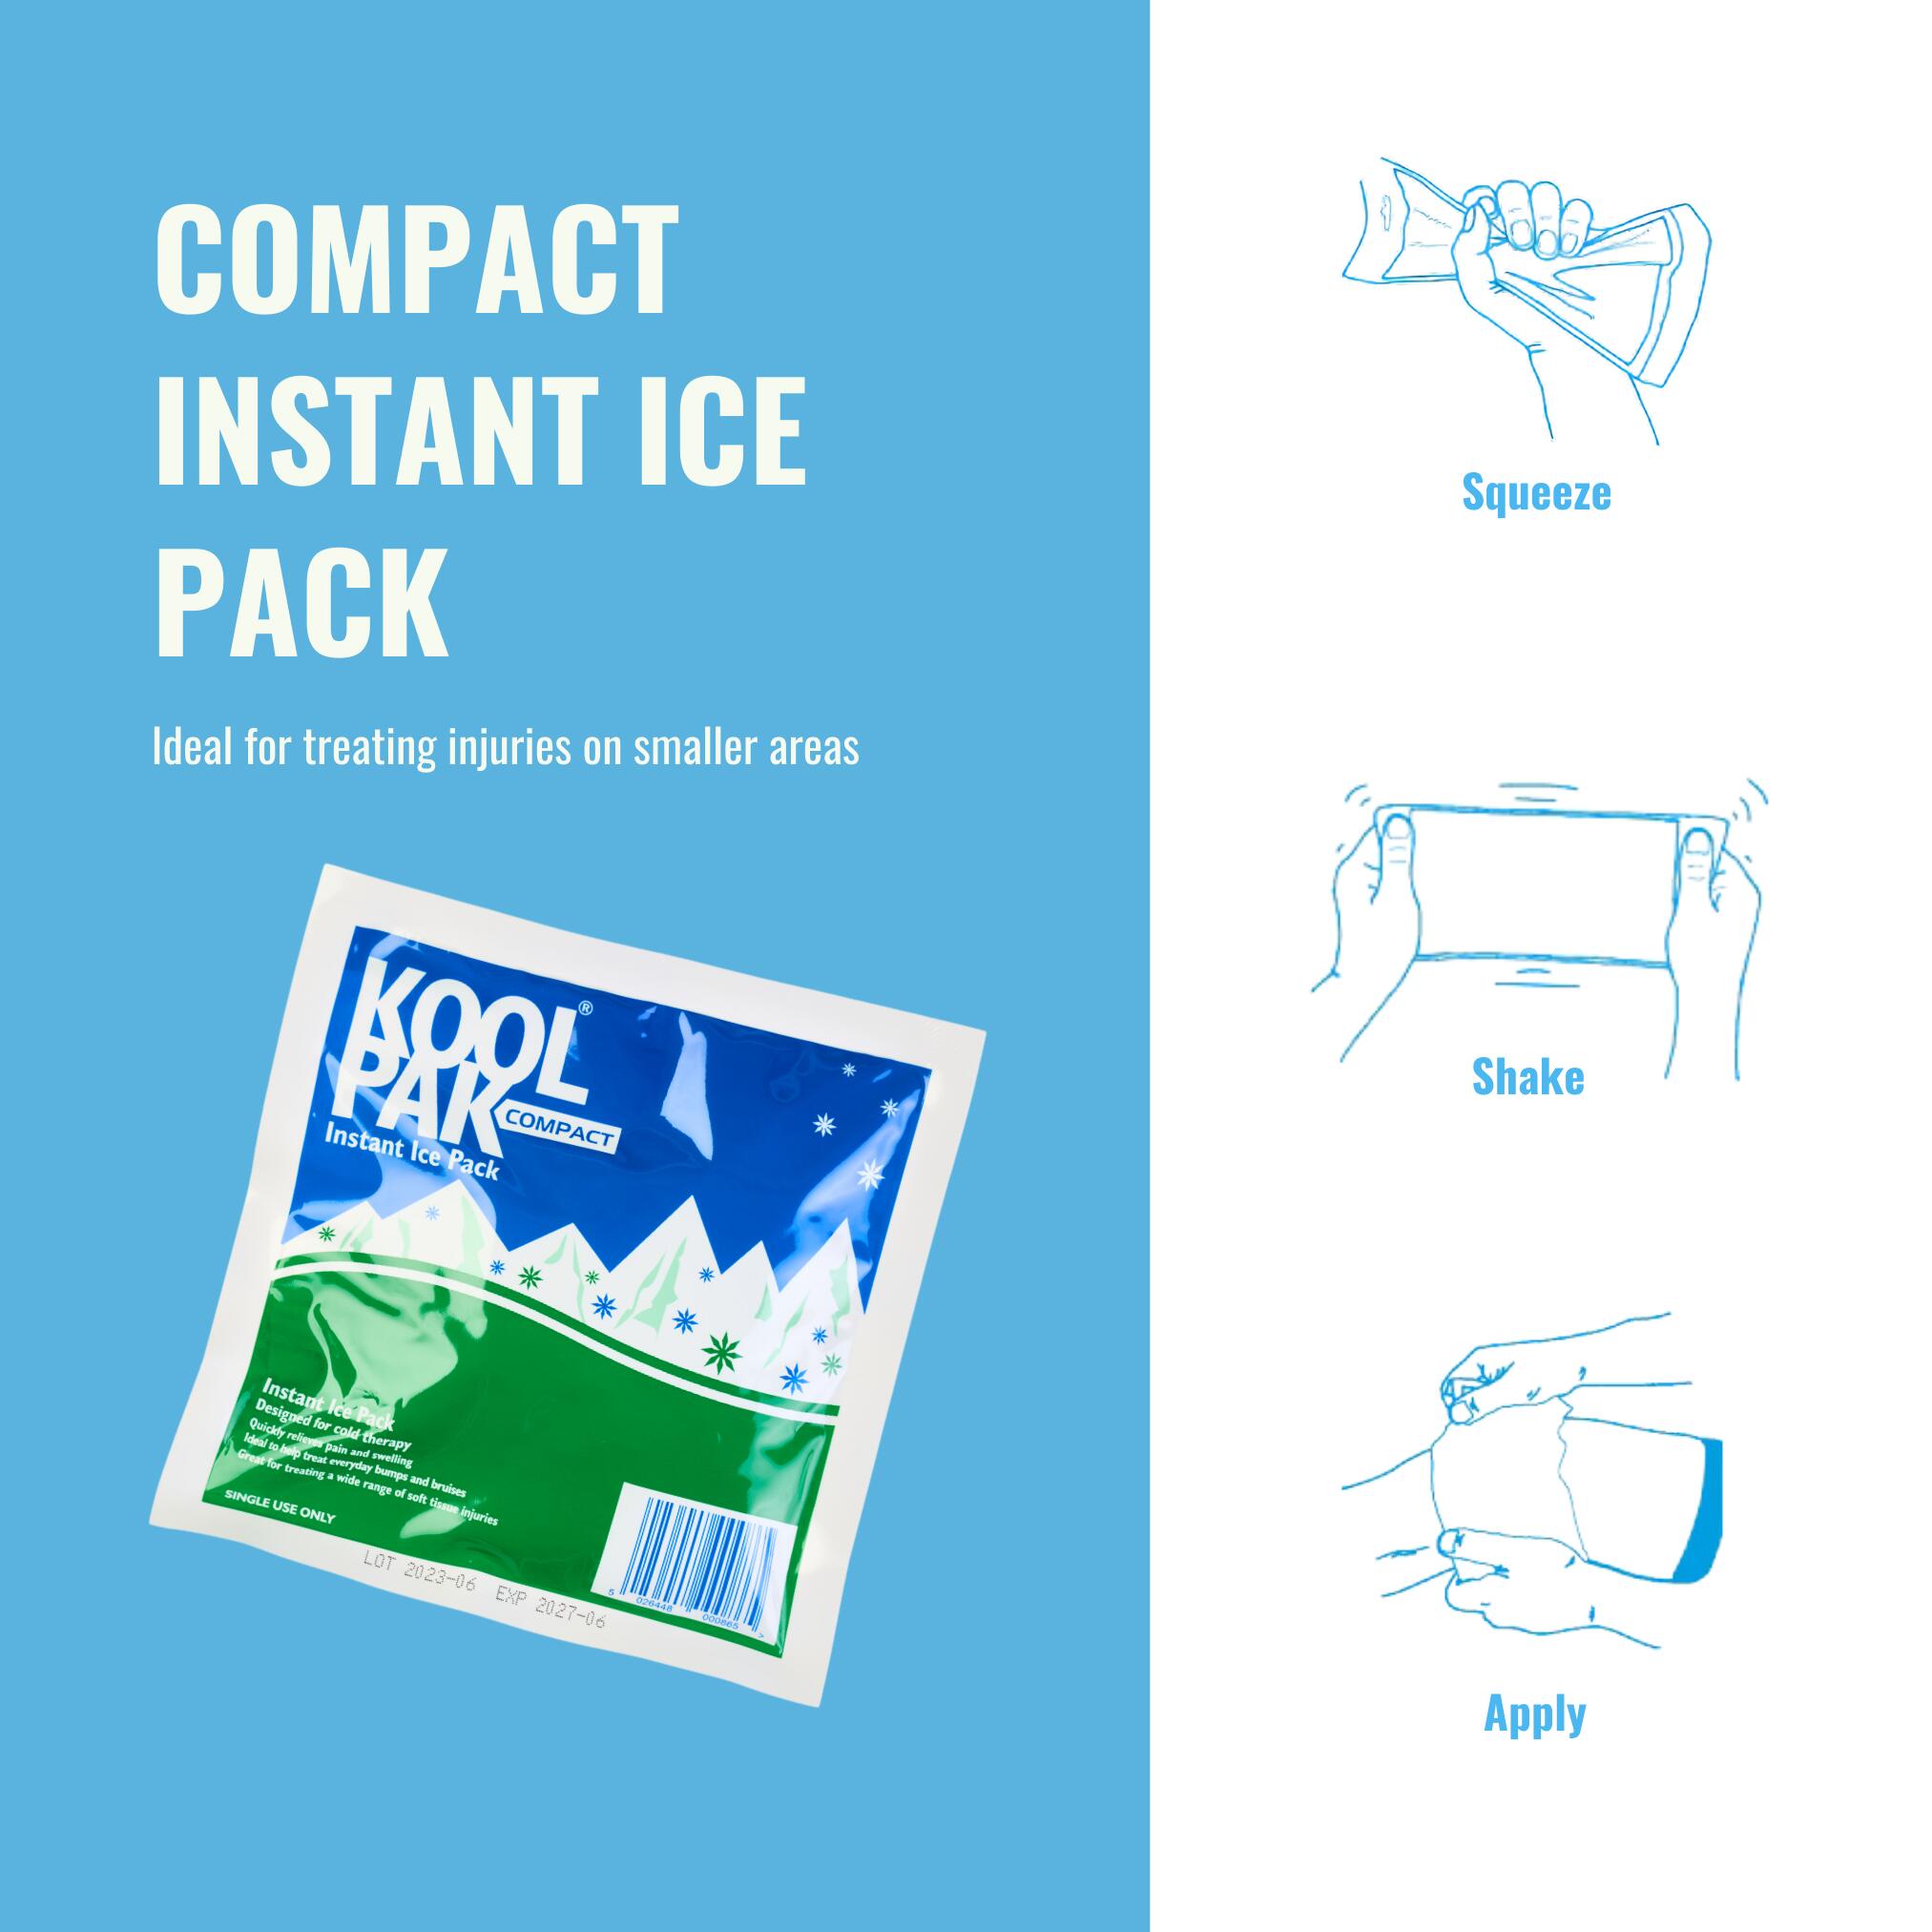 Koolpak Compact Instant Ice Pack - 15 x 15cm - Pack of 80 5/6